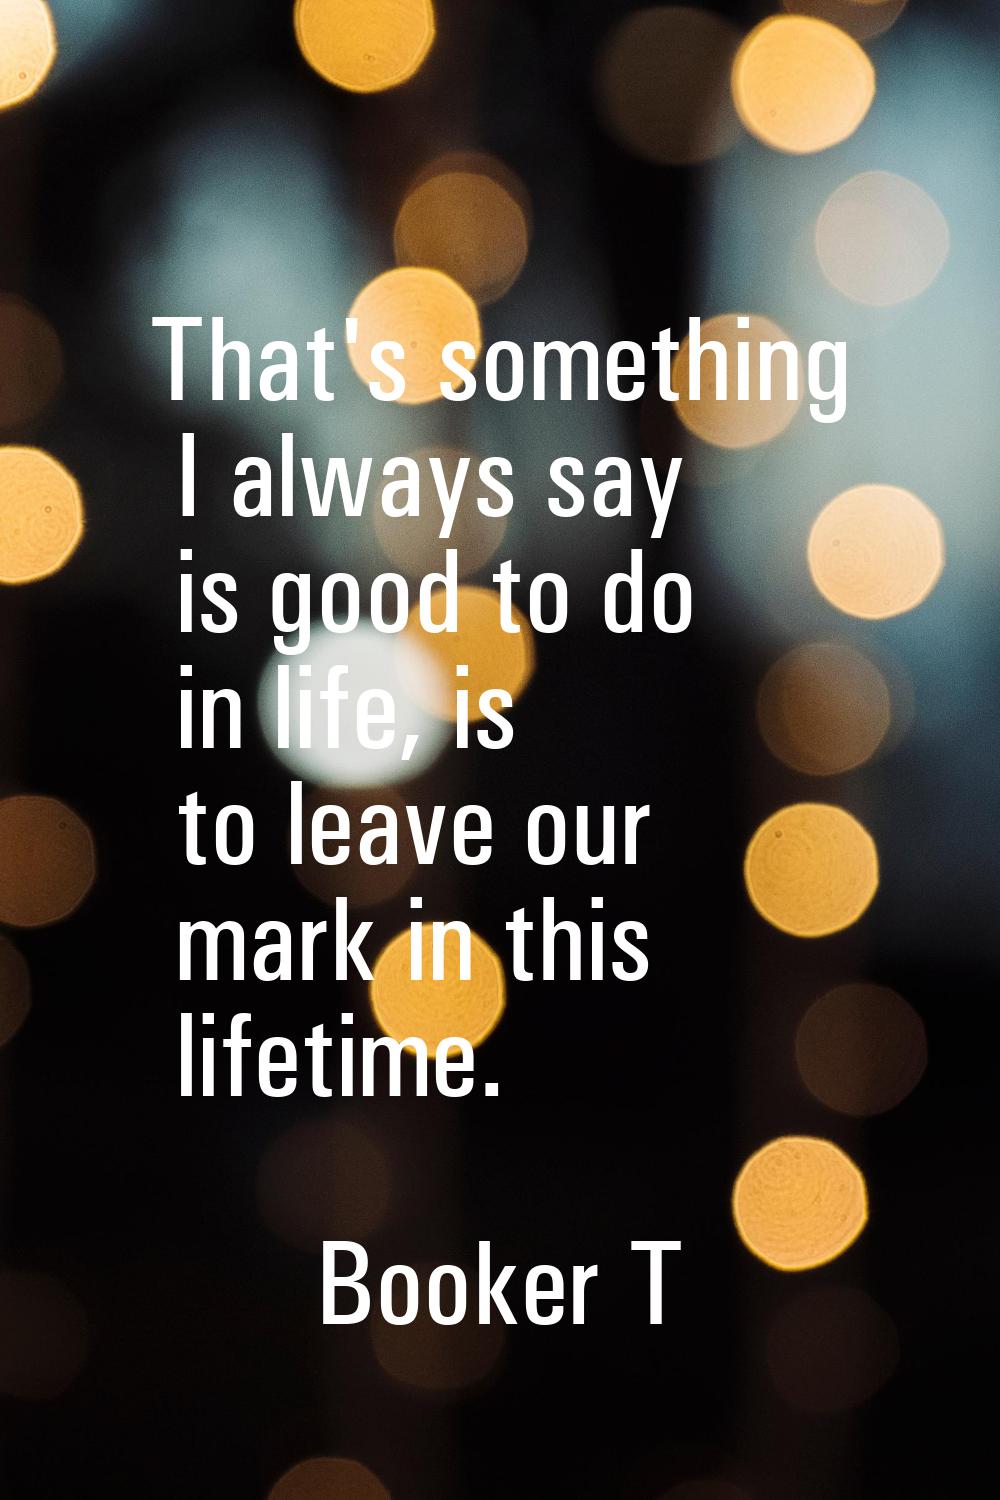 That's something I always say is good to do in life, is to leave our mark in this lifetime.